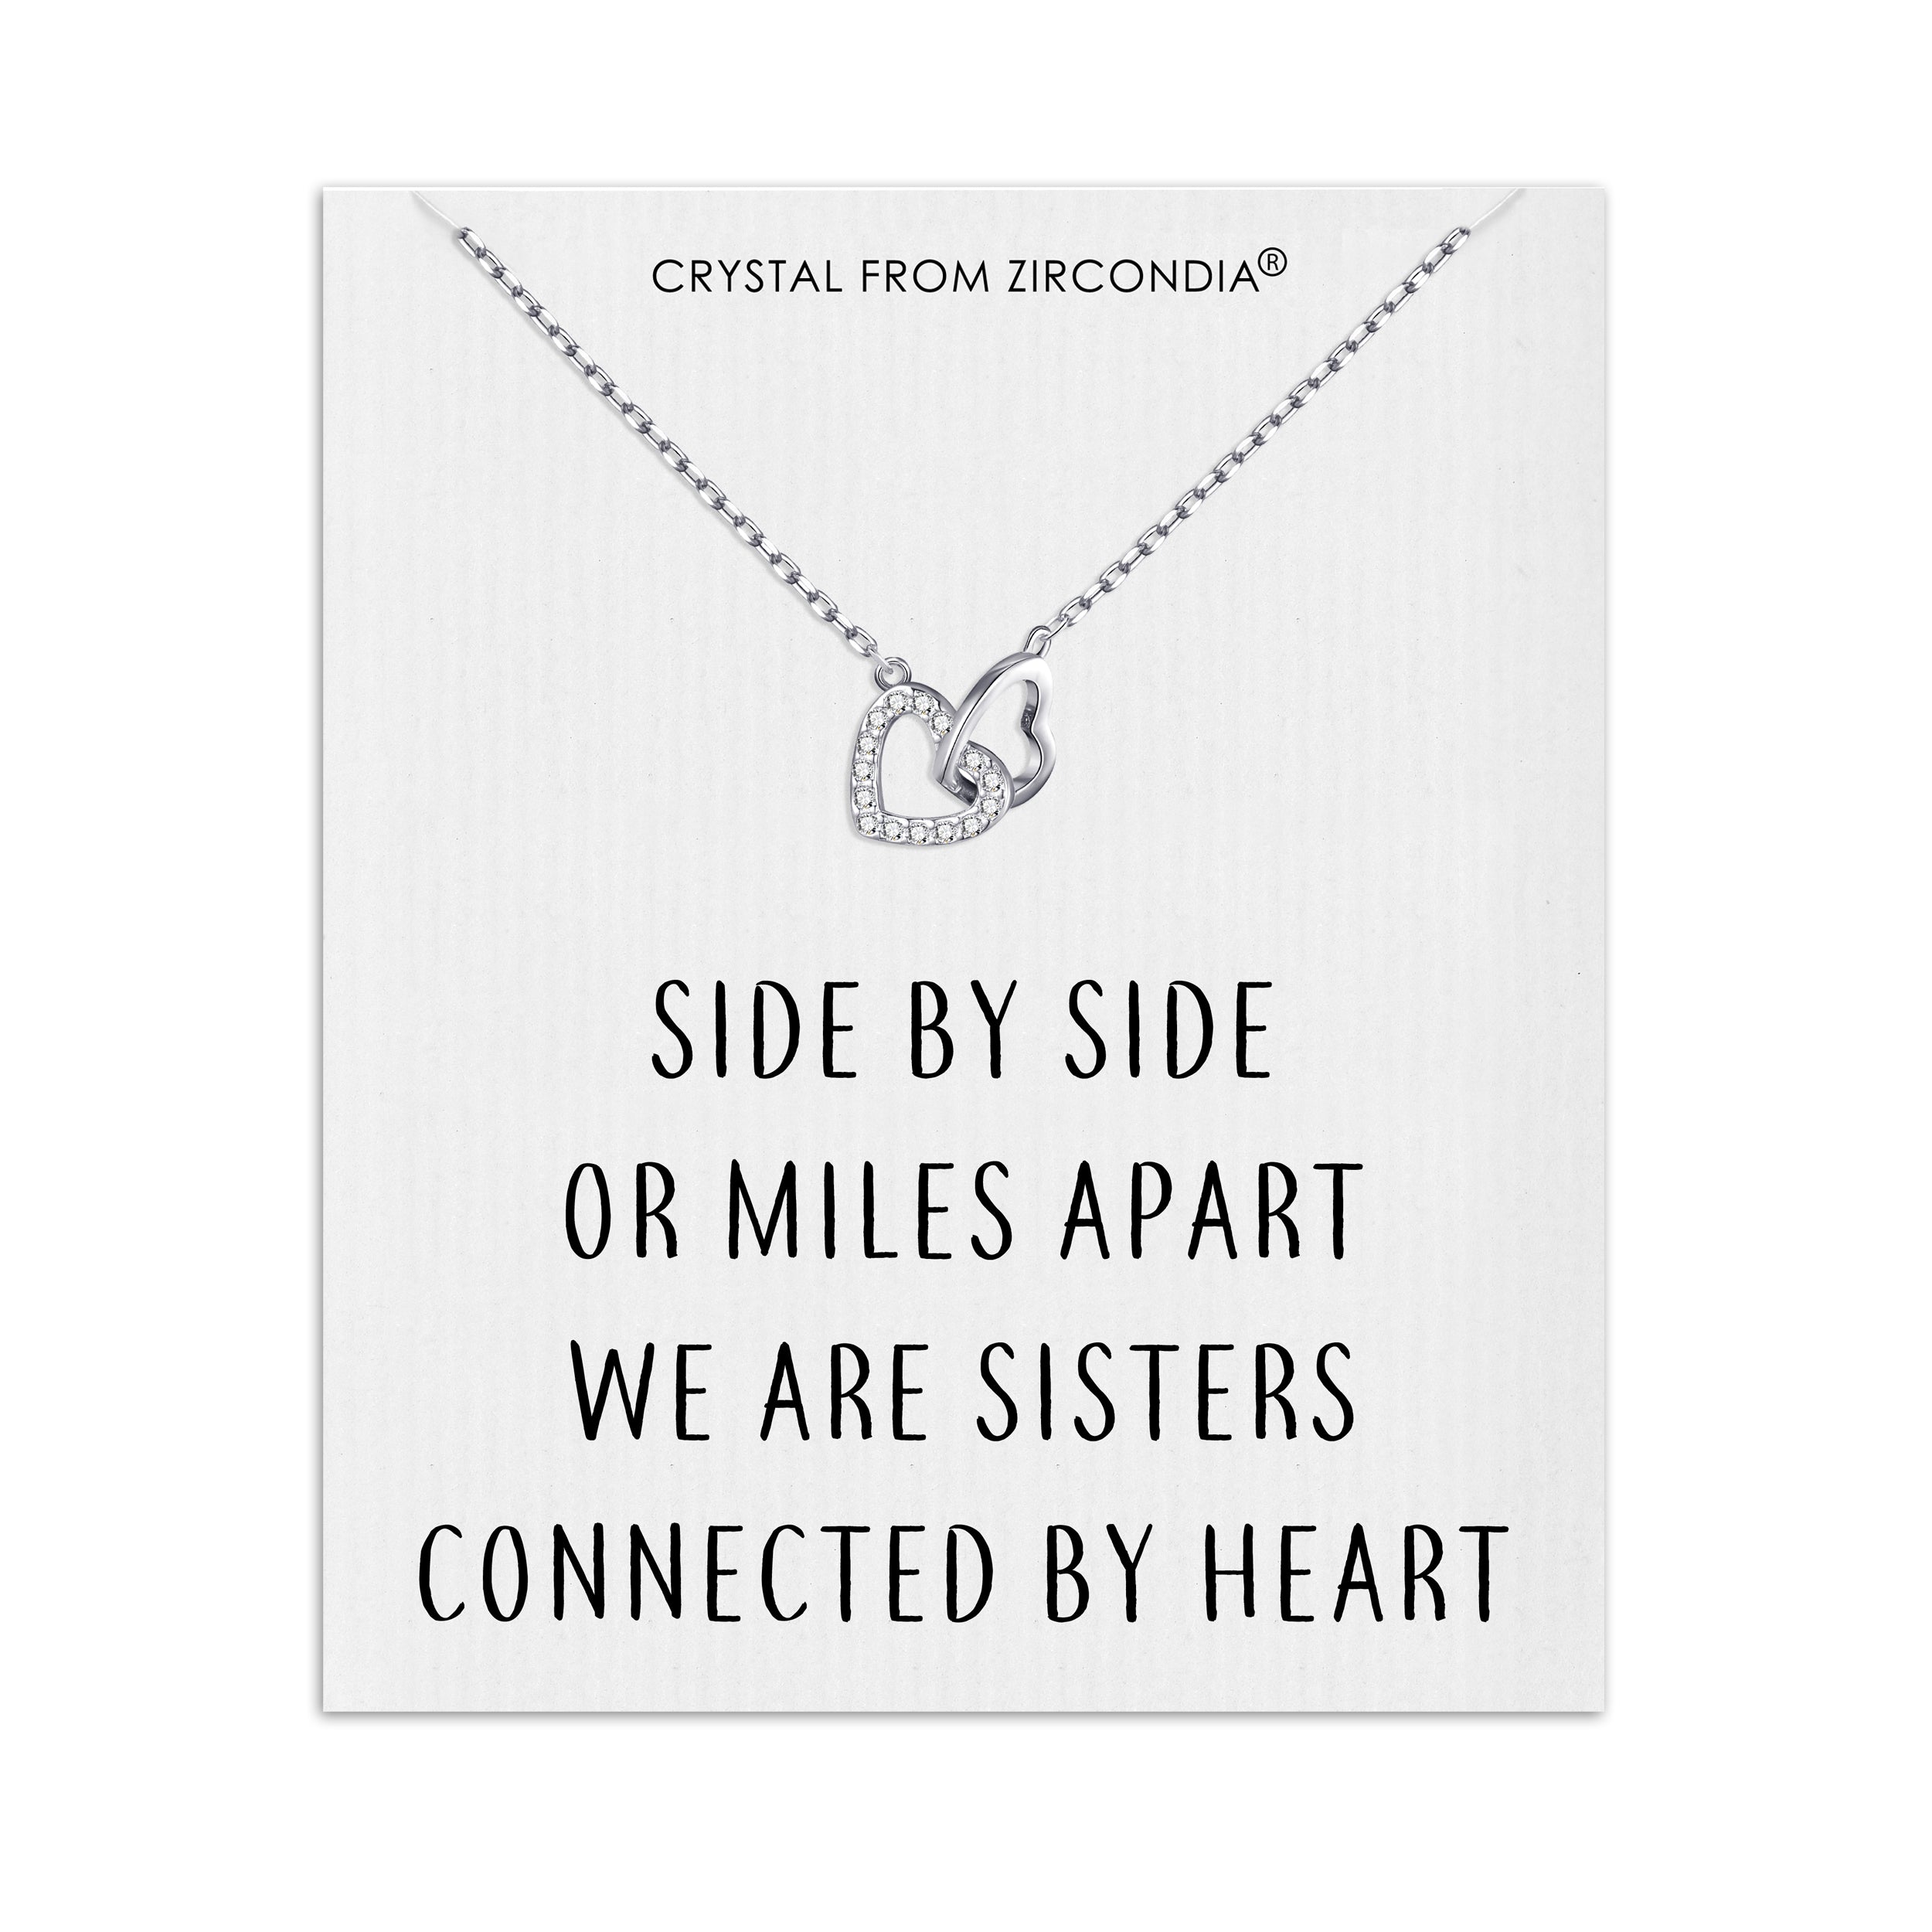 Sister Heart Link Necklace with Quote Card Created with Zircondia® Crystals